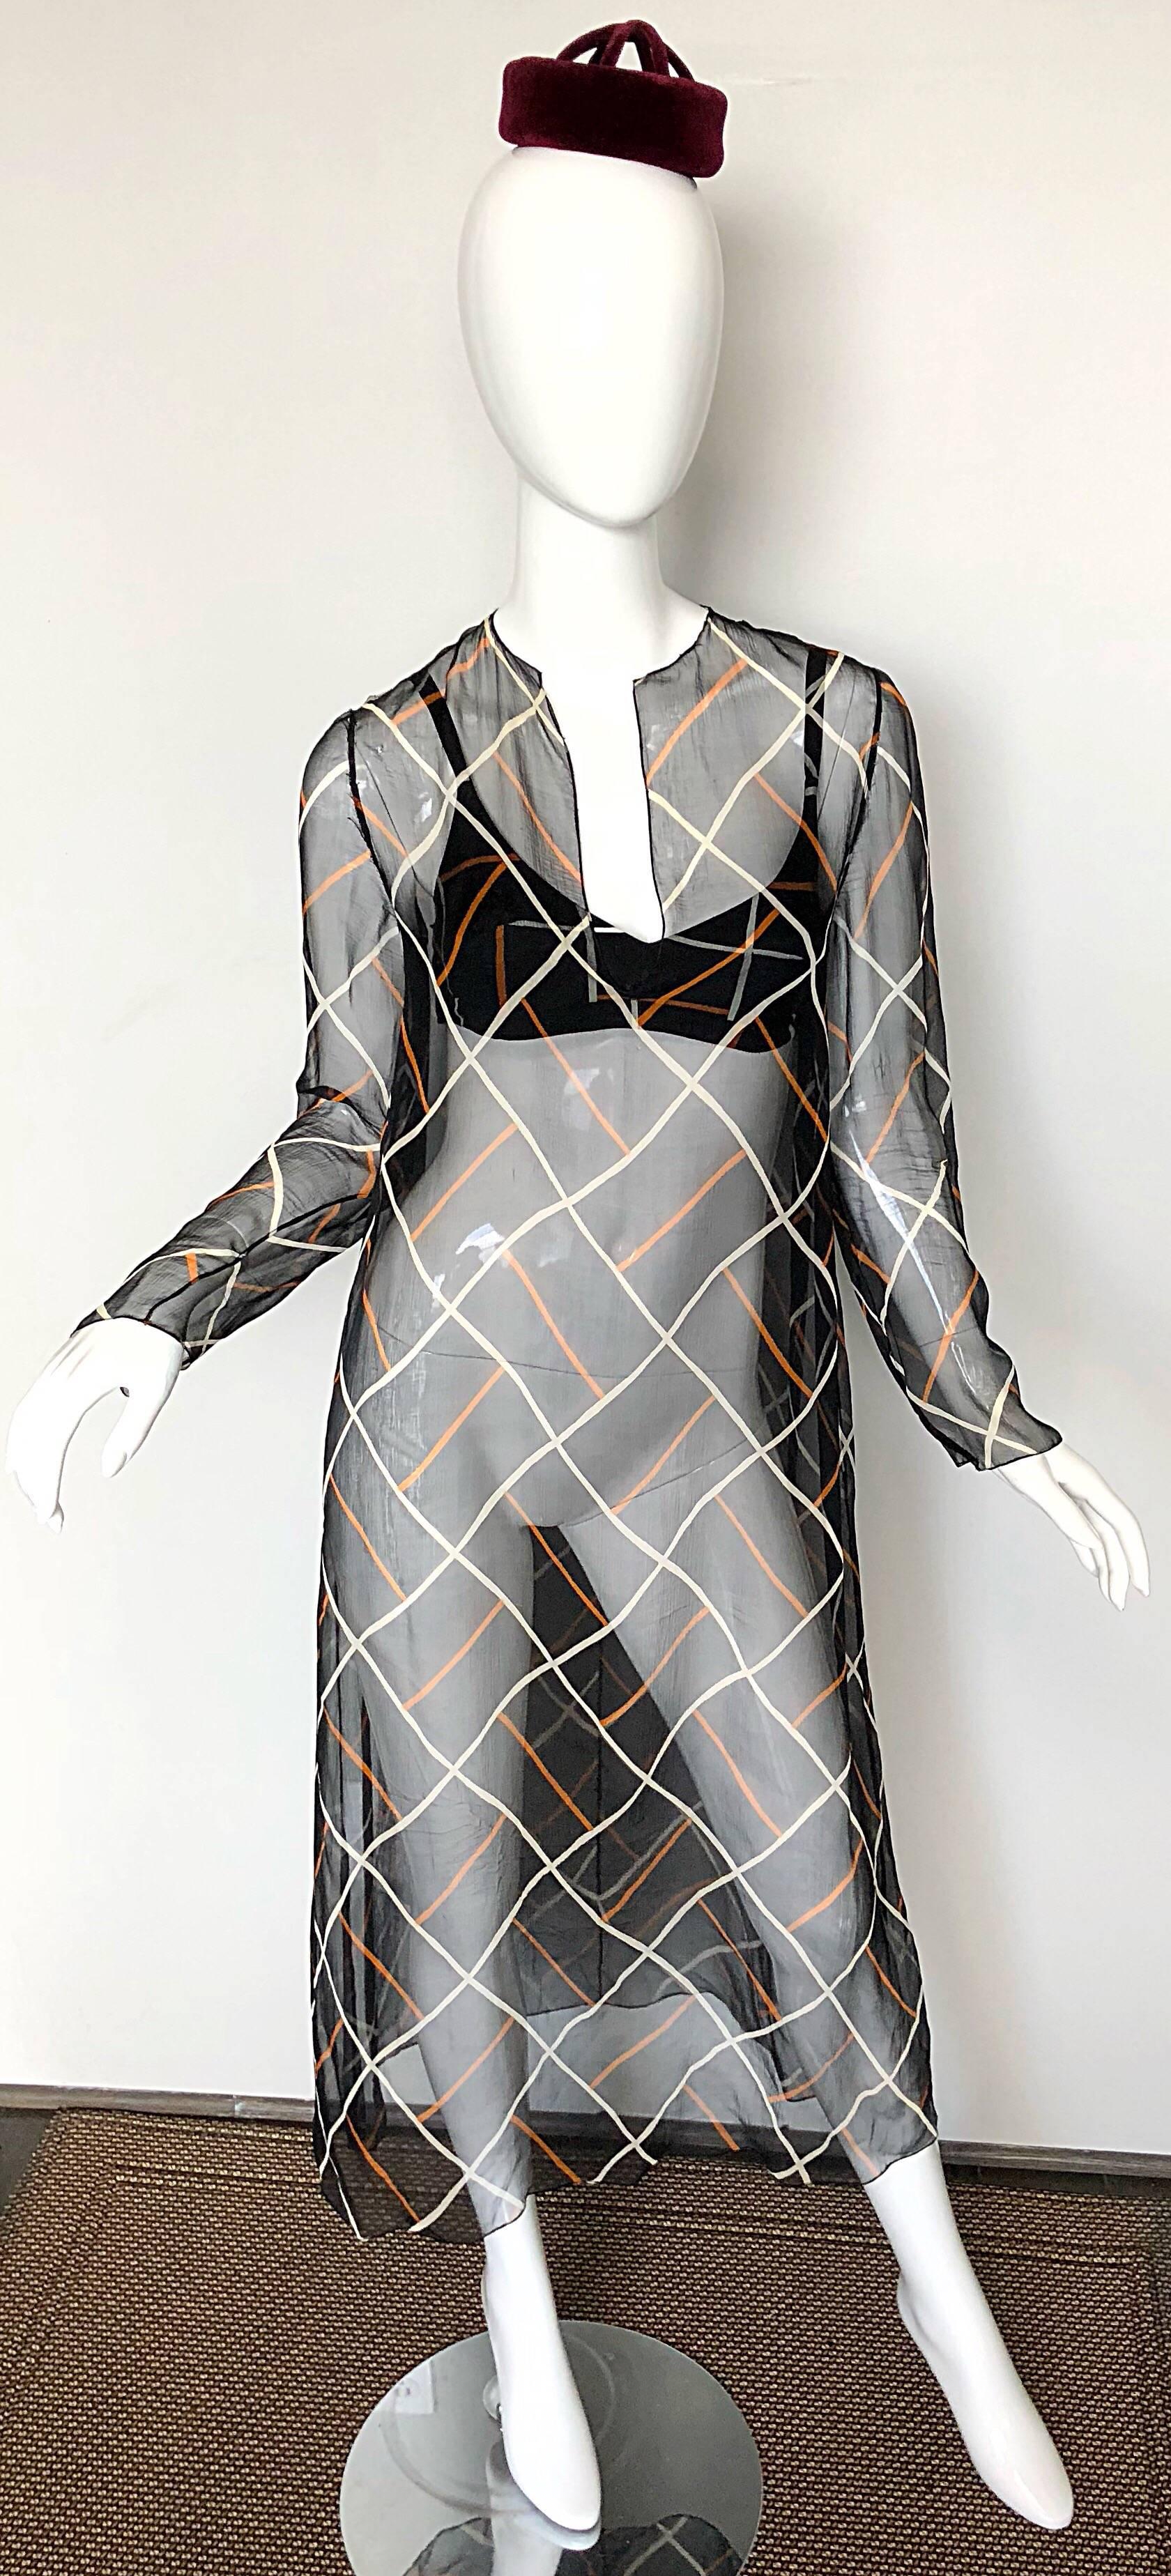 Directly from Marilyn Lewis' estate! Lewis was the founder / designer for Cardinali. She was a bored housewife with two children in the 1960s, and  was a fashion icon with an enormous amount of creativity..Though her fashion line, Cardinali was